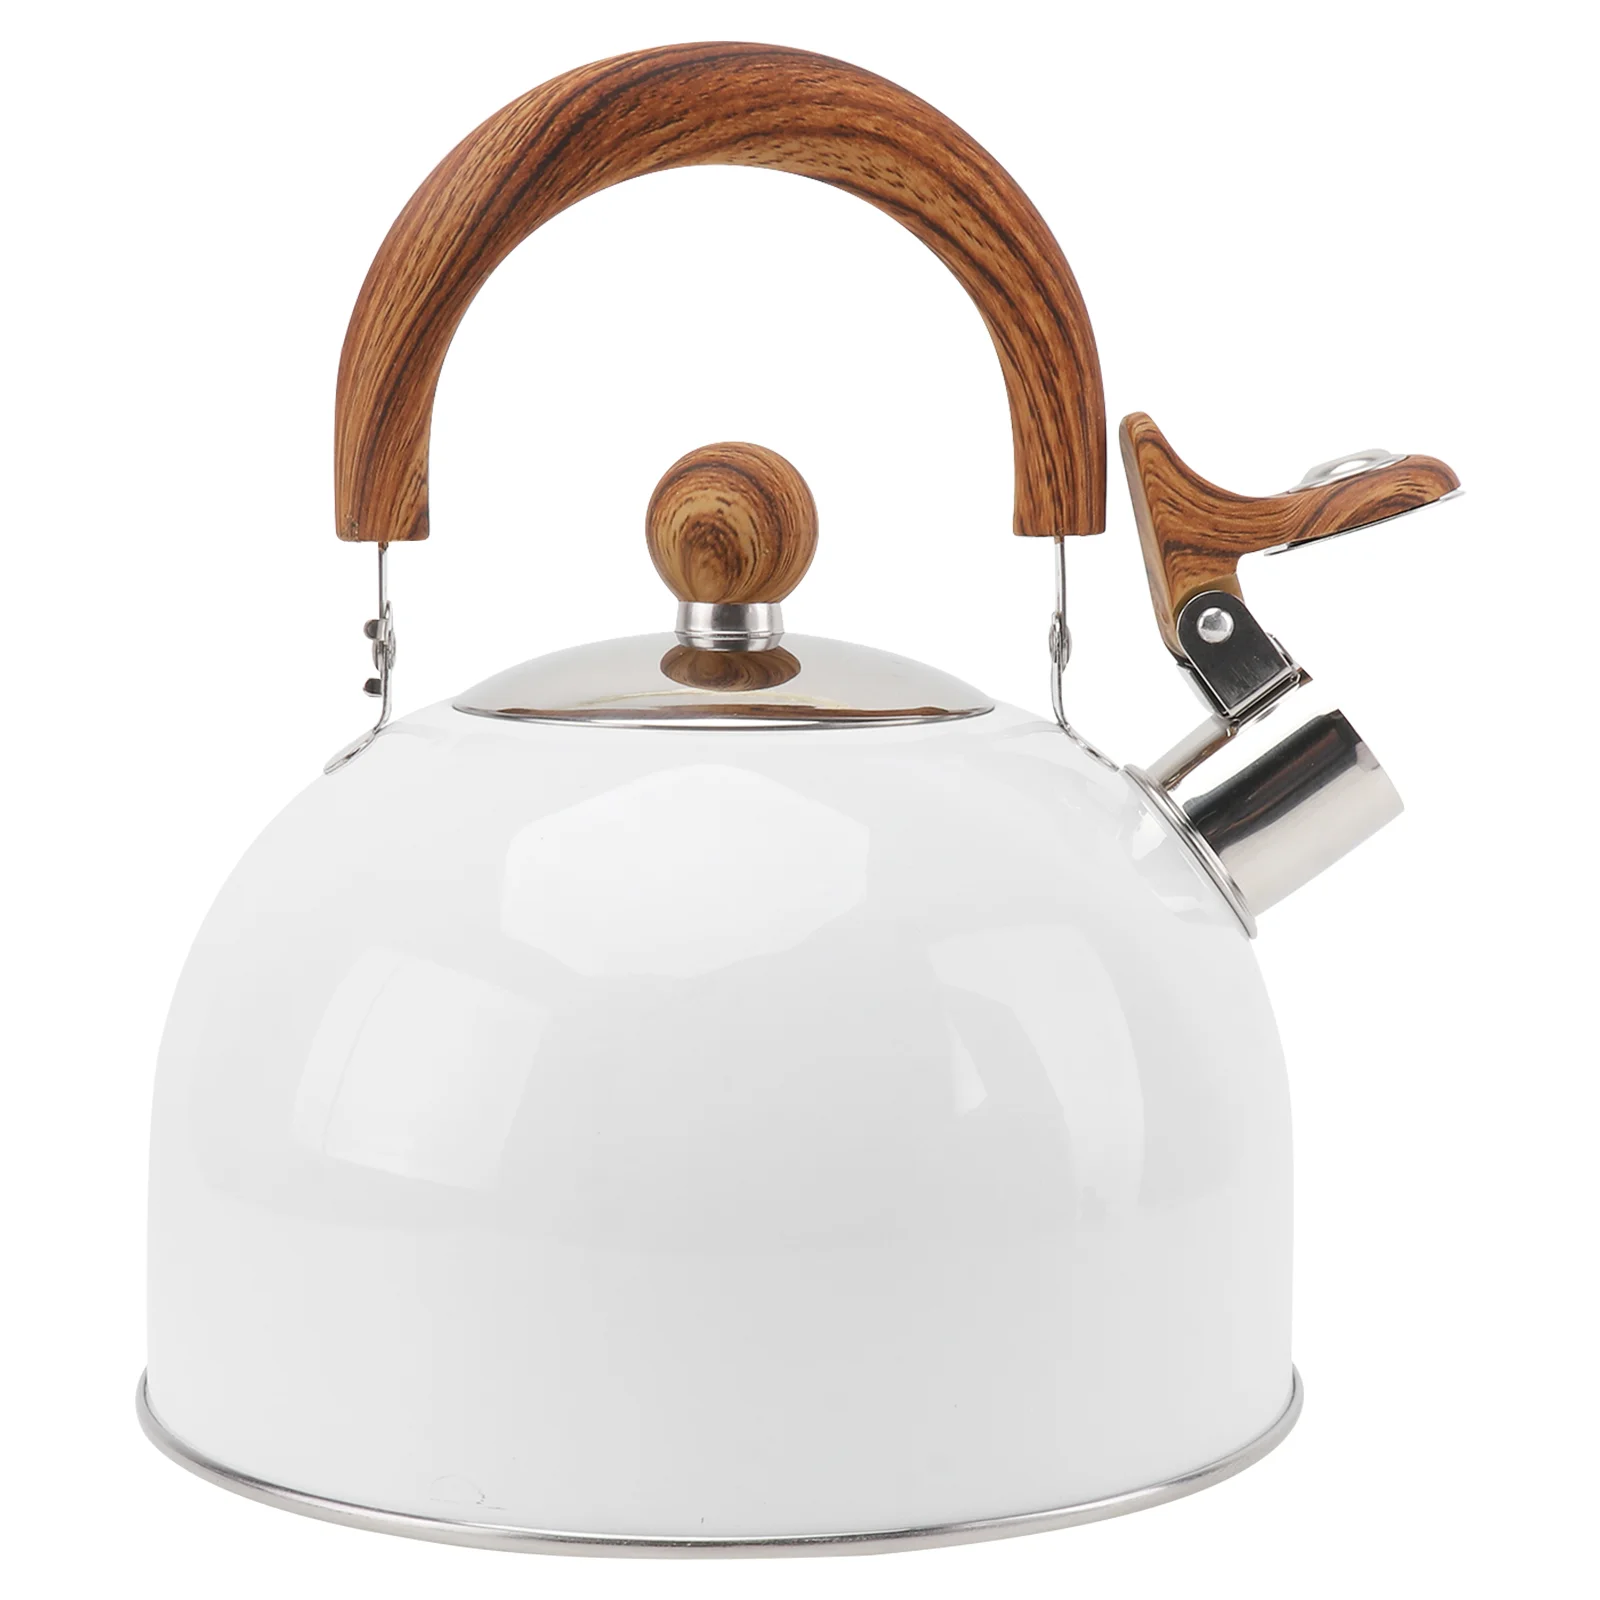 

Kettle Tea Whistling Teapot Water Stove Pot Stovetop Steel Stainless Gas Kettles Boiling Coffee Whistle Camping Metal Singing